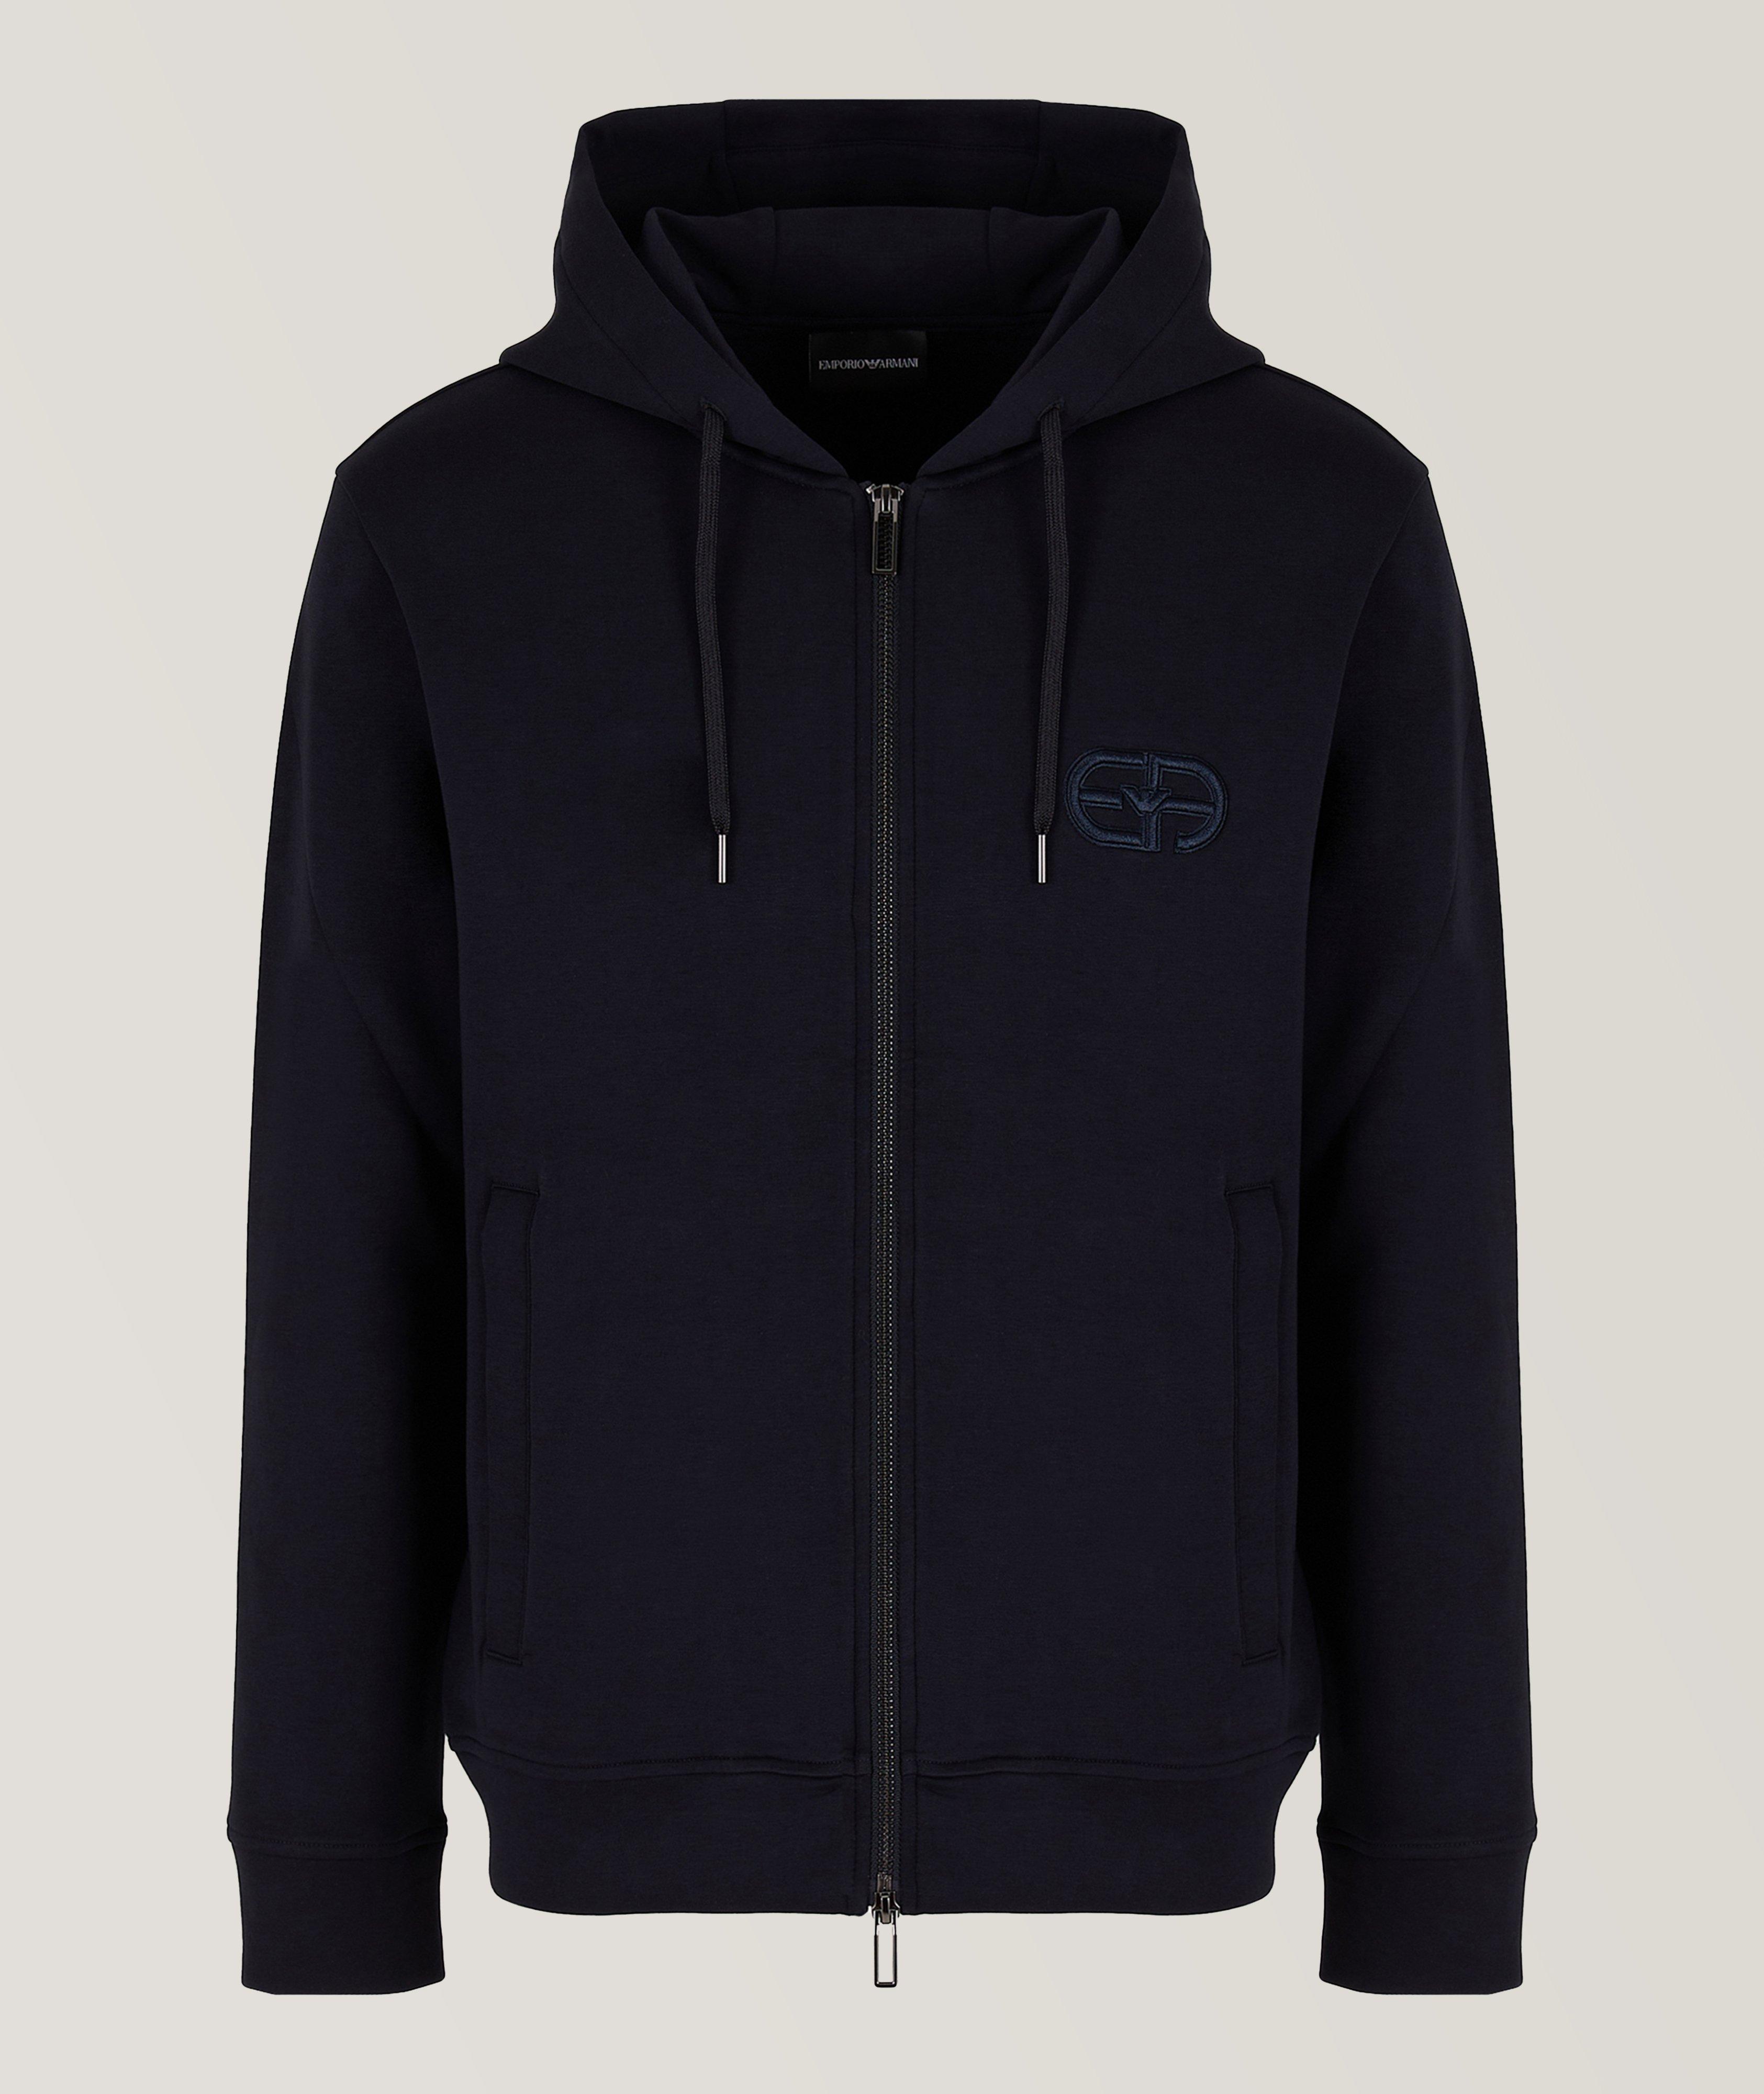 Full-Zip Double Jersey Hooded Sweater image 0